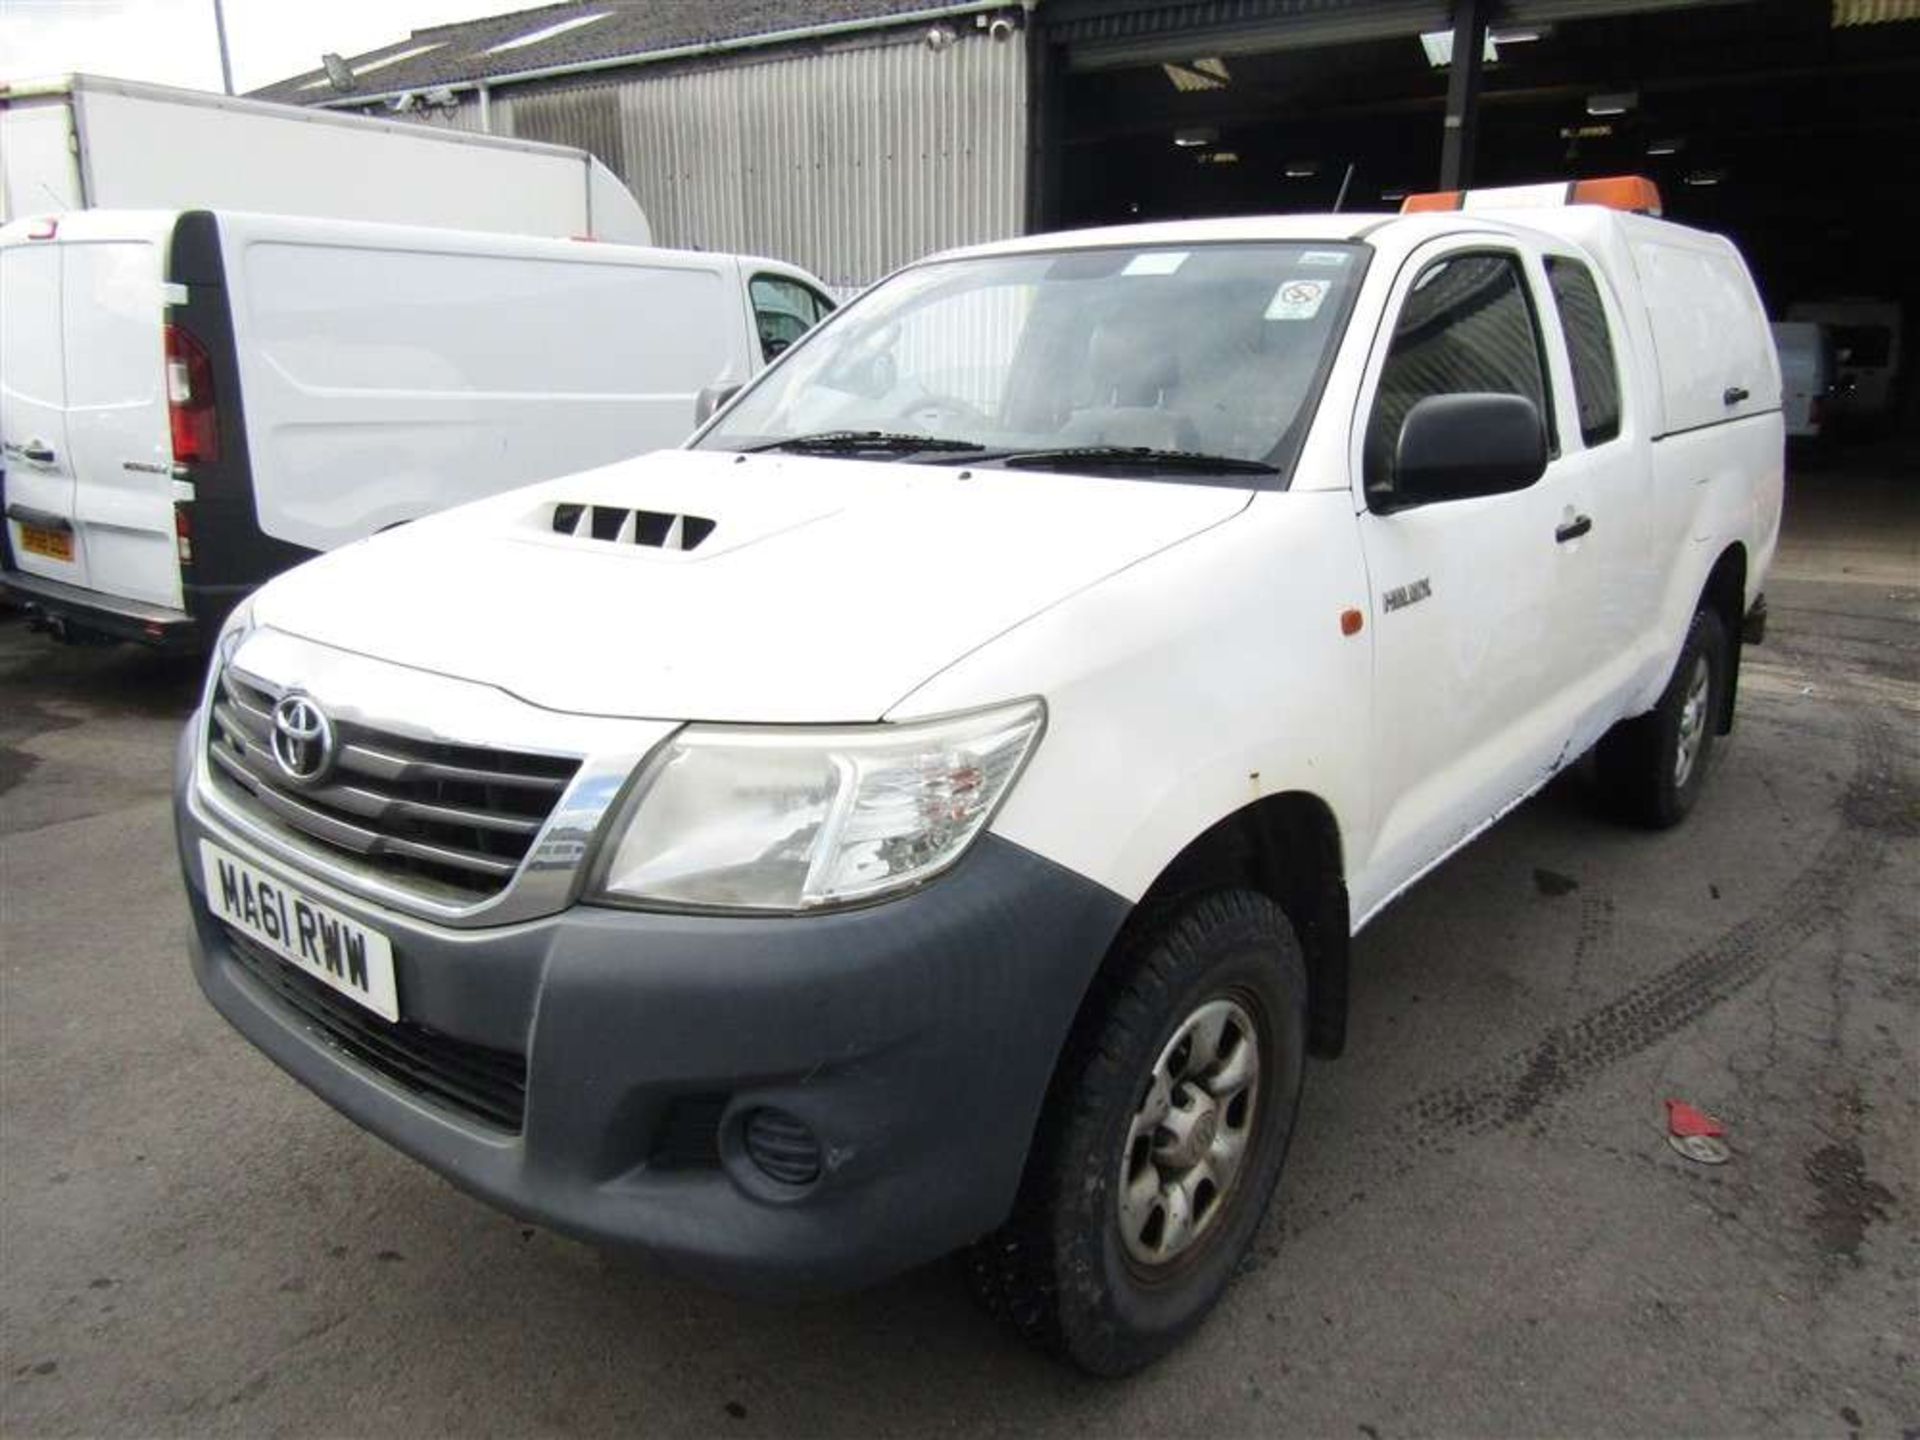 2011 61 reg Toyota Hilux HL2 D-4D 4x4 ECB (Direct United Utilities Water) - Image 2 of 6